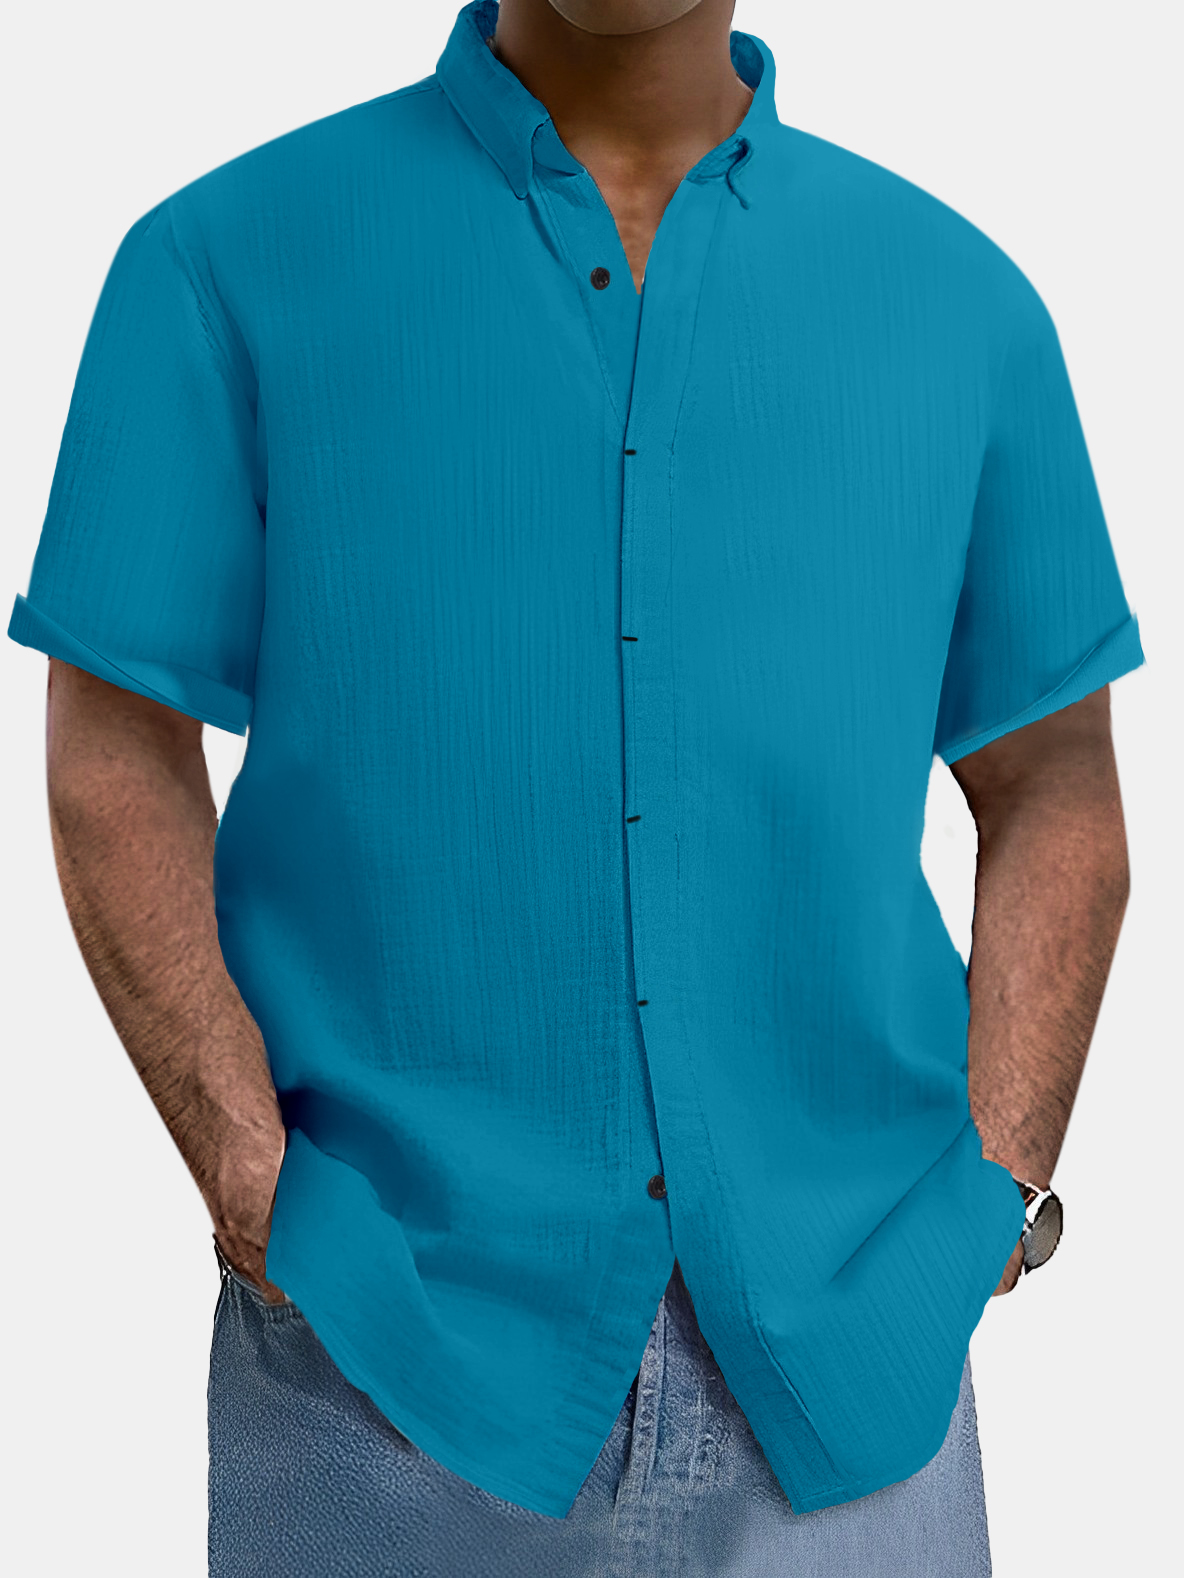 Men's comfortable solid color cotton and linen short-sleeved shirt